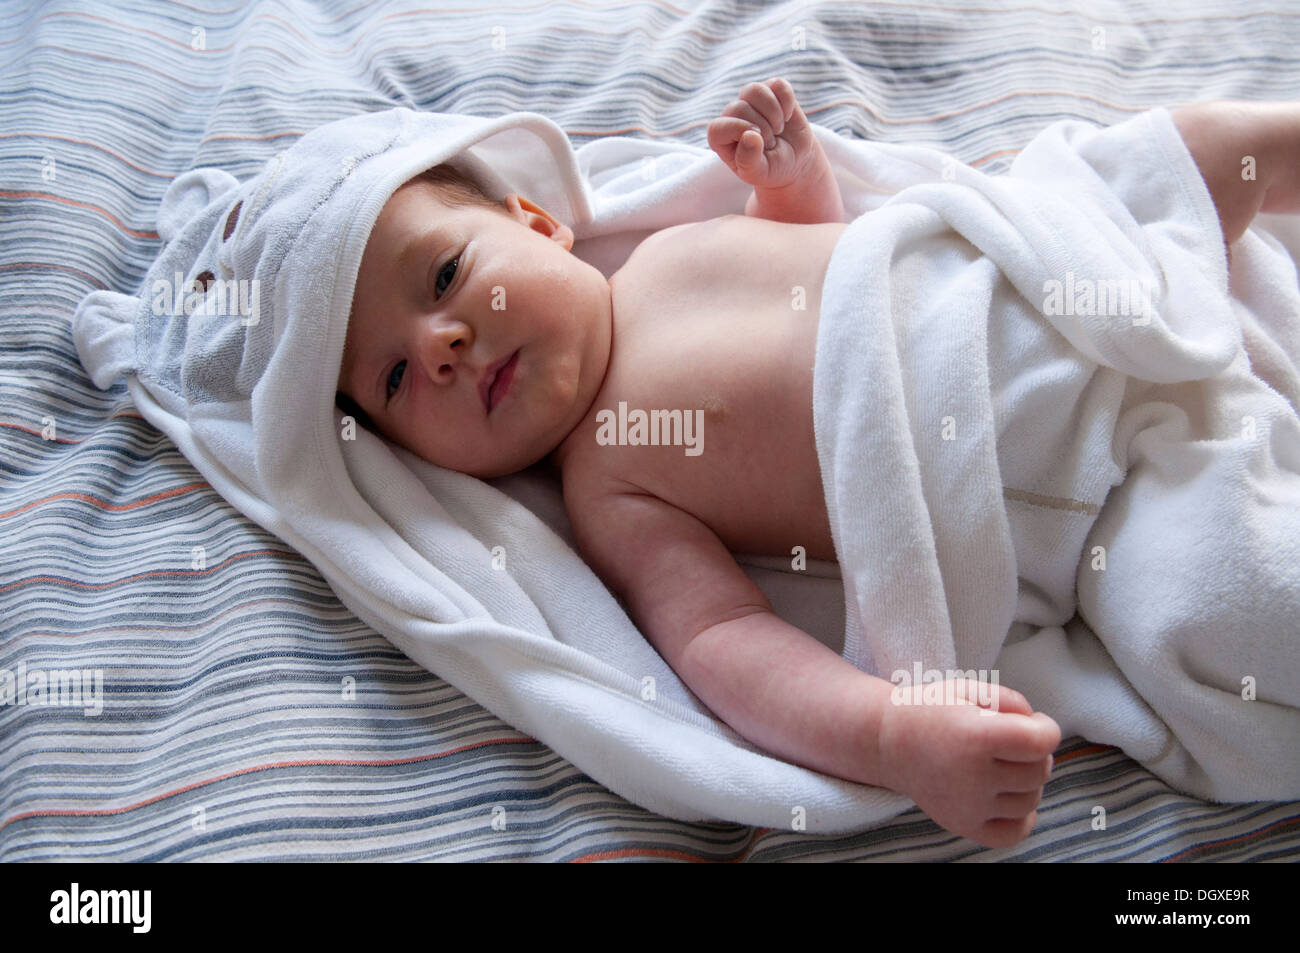 Little baby girl wrapped up in a white hooded towel Stock Photo